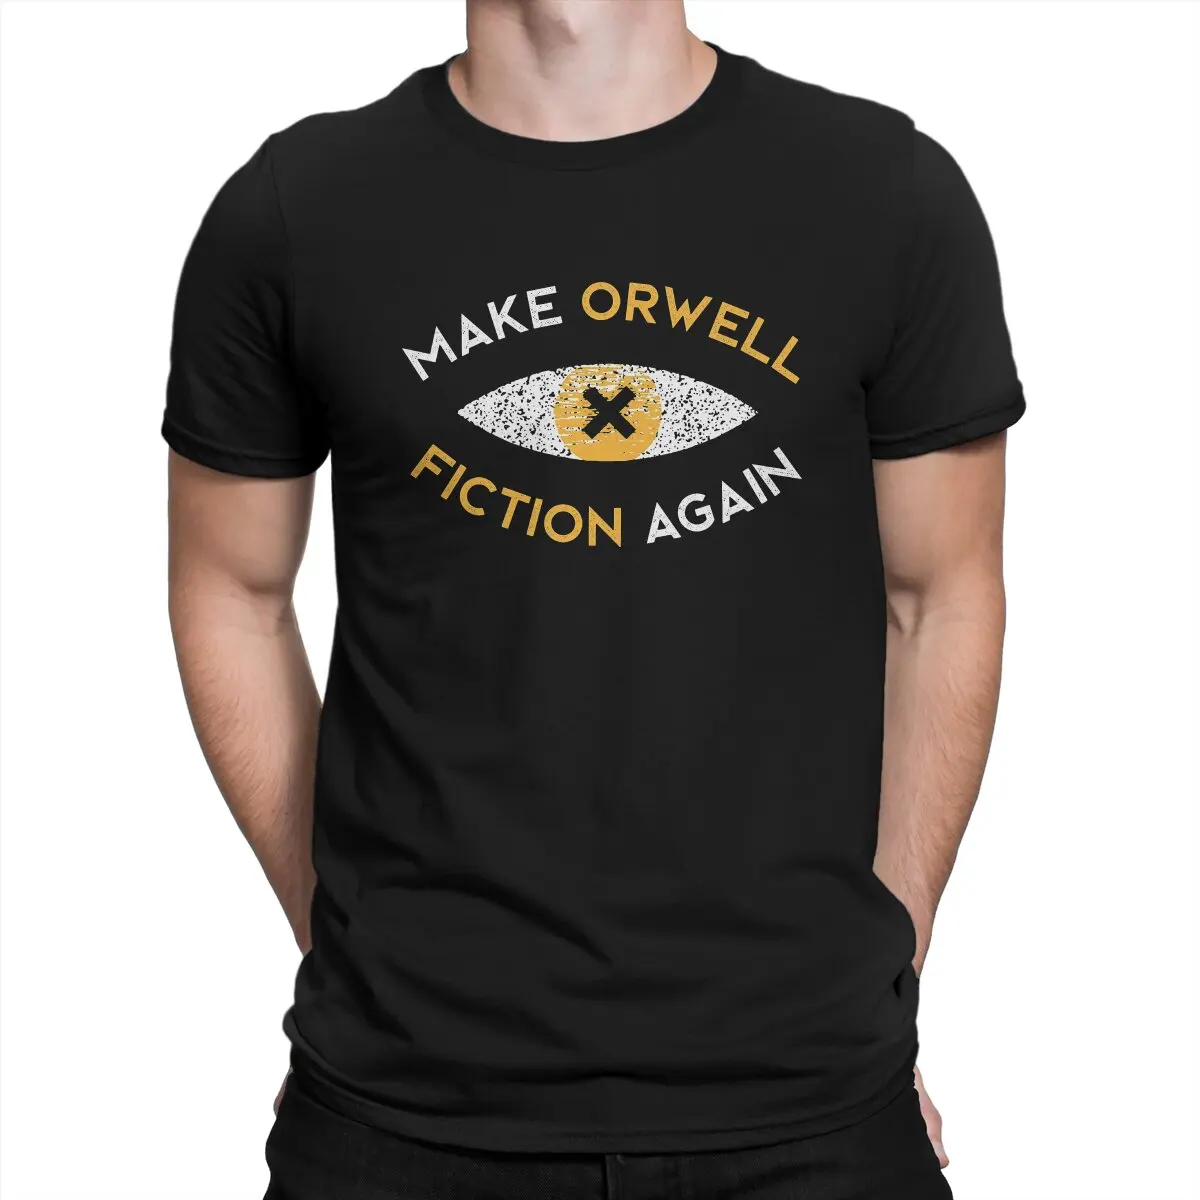 

Make Orwell fiction again Philosophy gift T-Shirts Men Philosophy Hipster 100% Cotton Tees Crew Neck Short Sleeve T Shirt